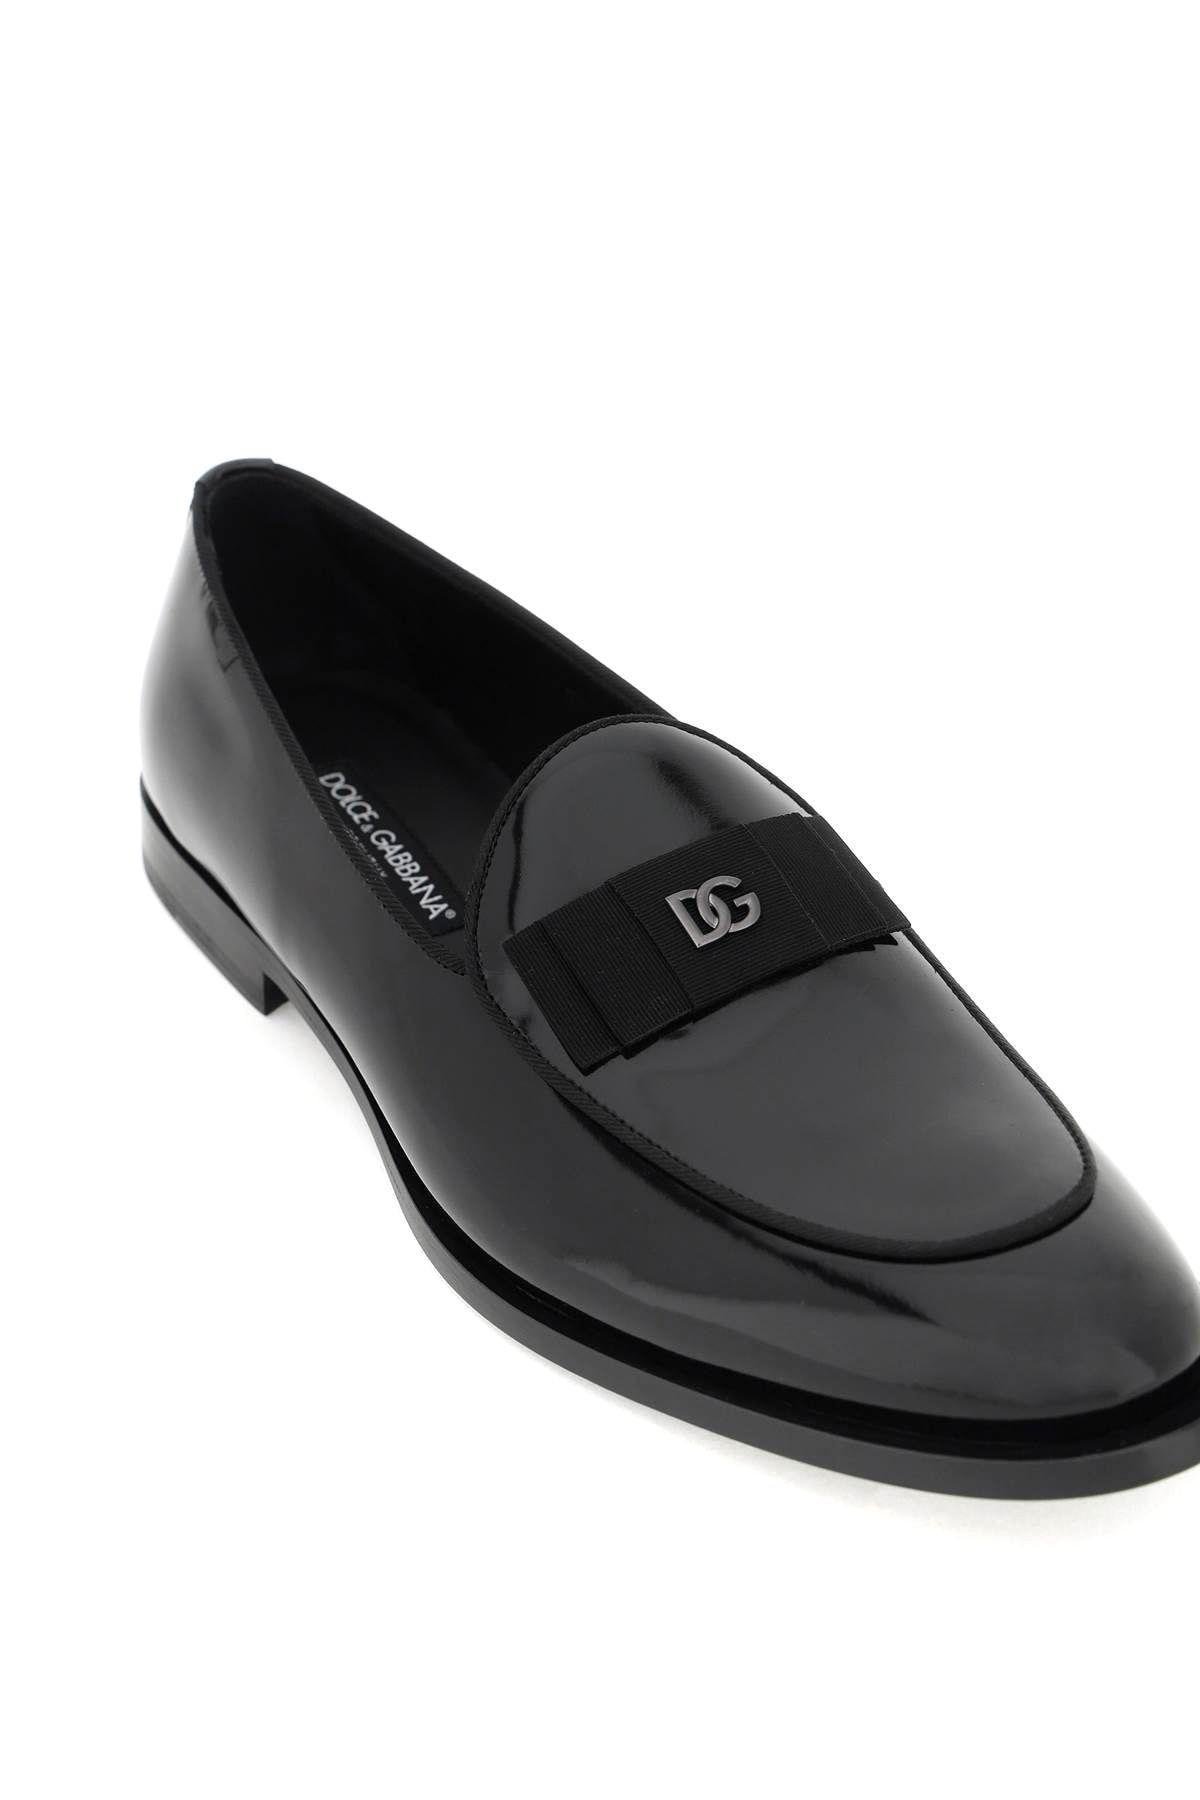 Dolce & Gabbana Glossy Leather Loafers in Black for Men | Lyst